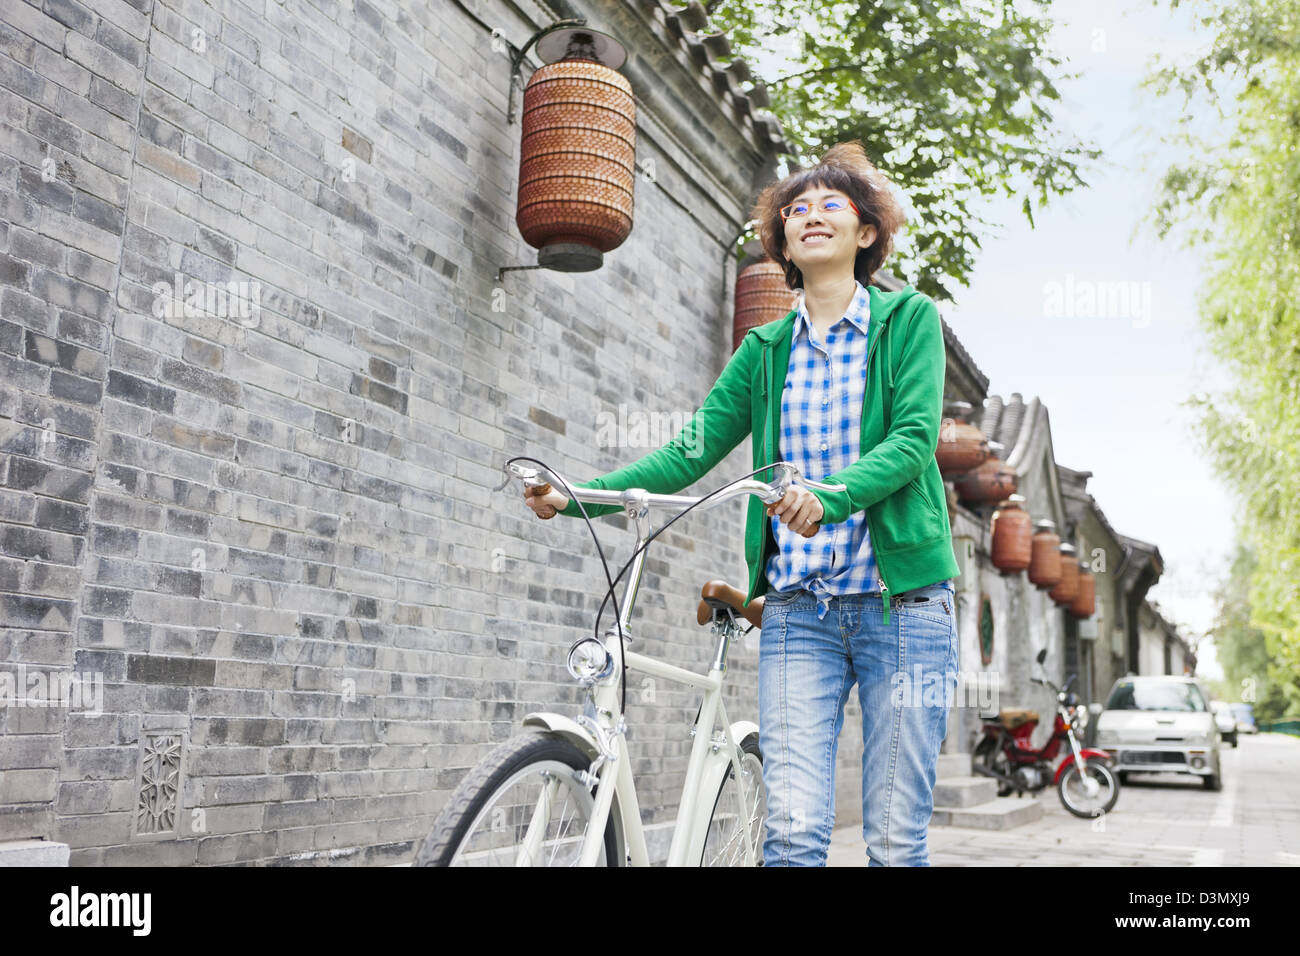 Smiling Young Asian Chinese Woman in Bicycle, Beijing, China Stock Photo